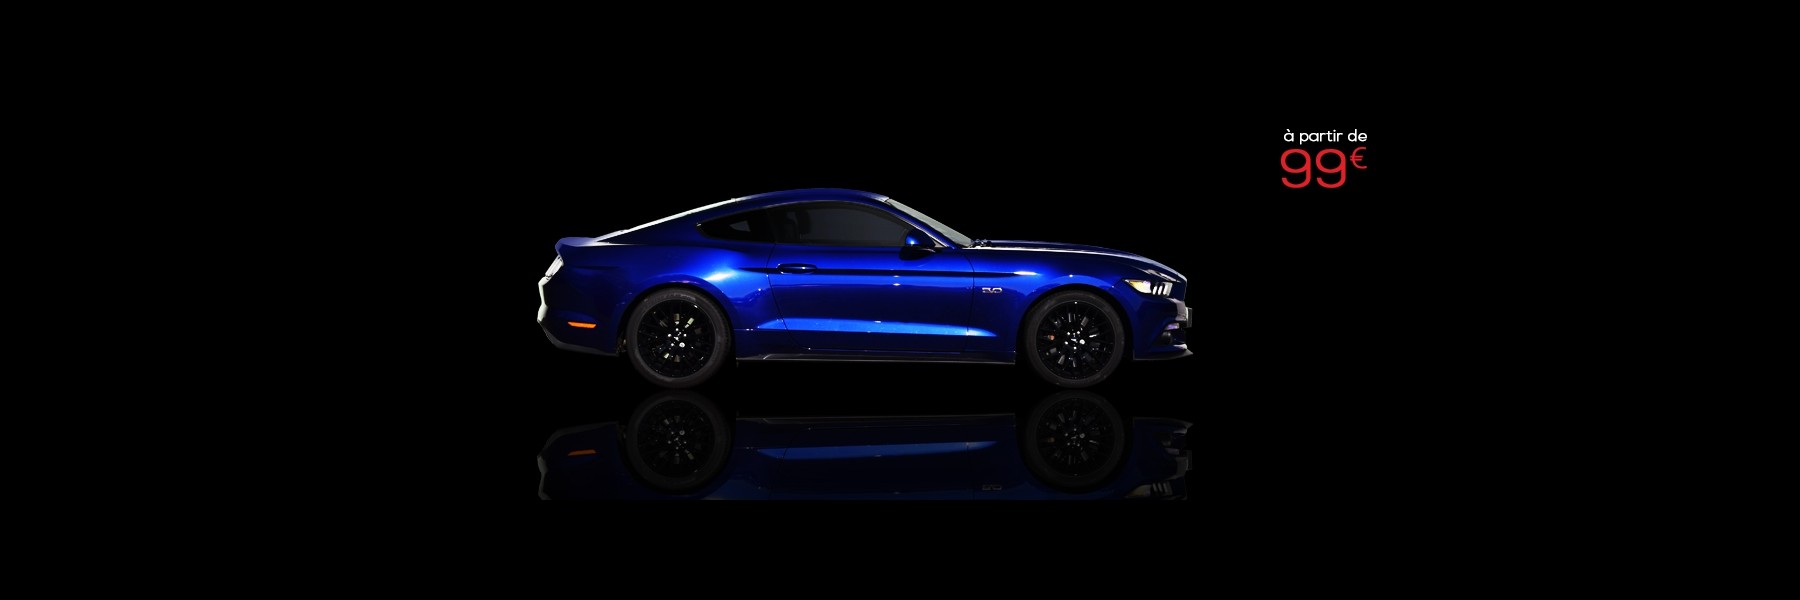 Stage de pilotage Ford Mustang GT